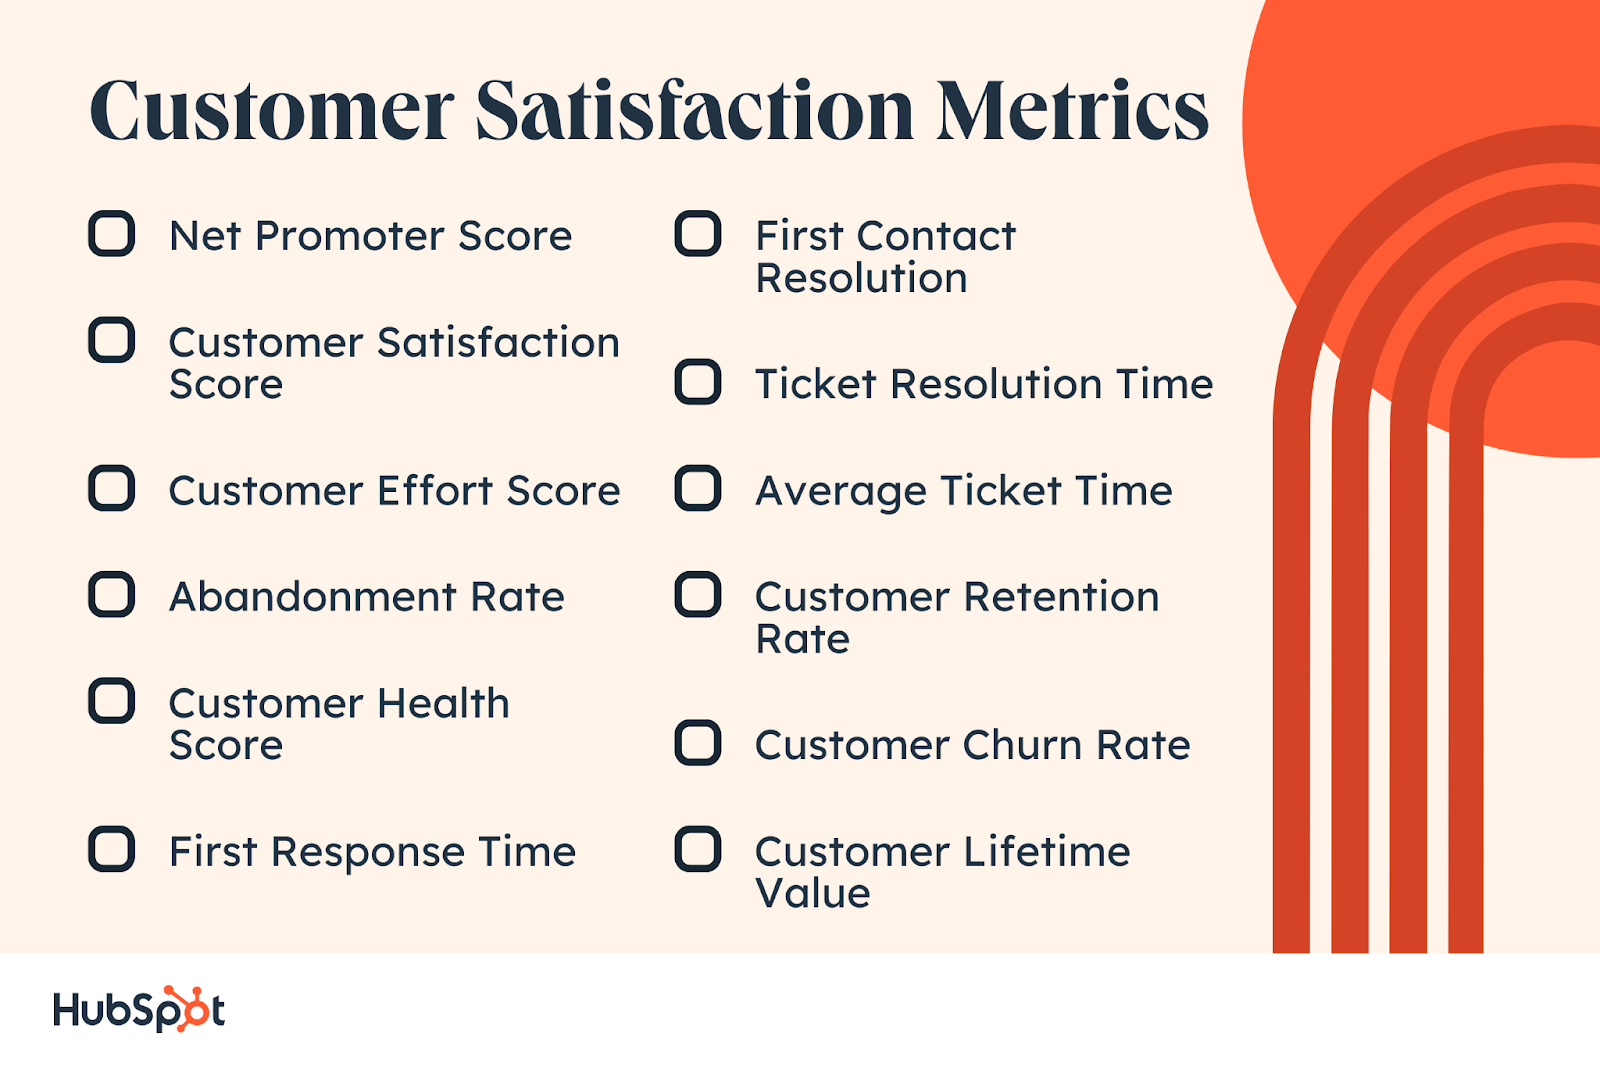 Top customer satisfaction metrics graphic: net promoter score, customer satisfaction score, customer effort score, customer health score, abandonment rate, first response rate, first contact resolution, ticket resolution time, average ticket time, customer retention rate, customer churn rate, customer lifetime value.